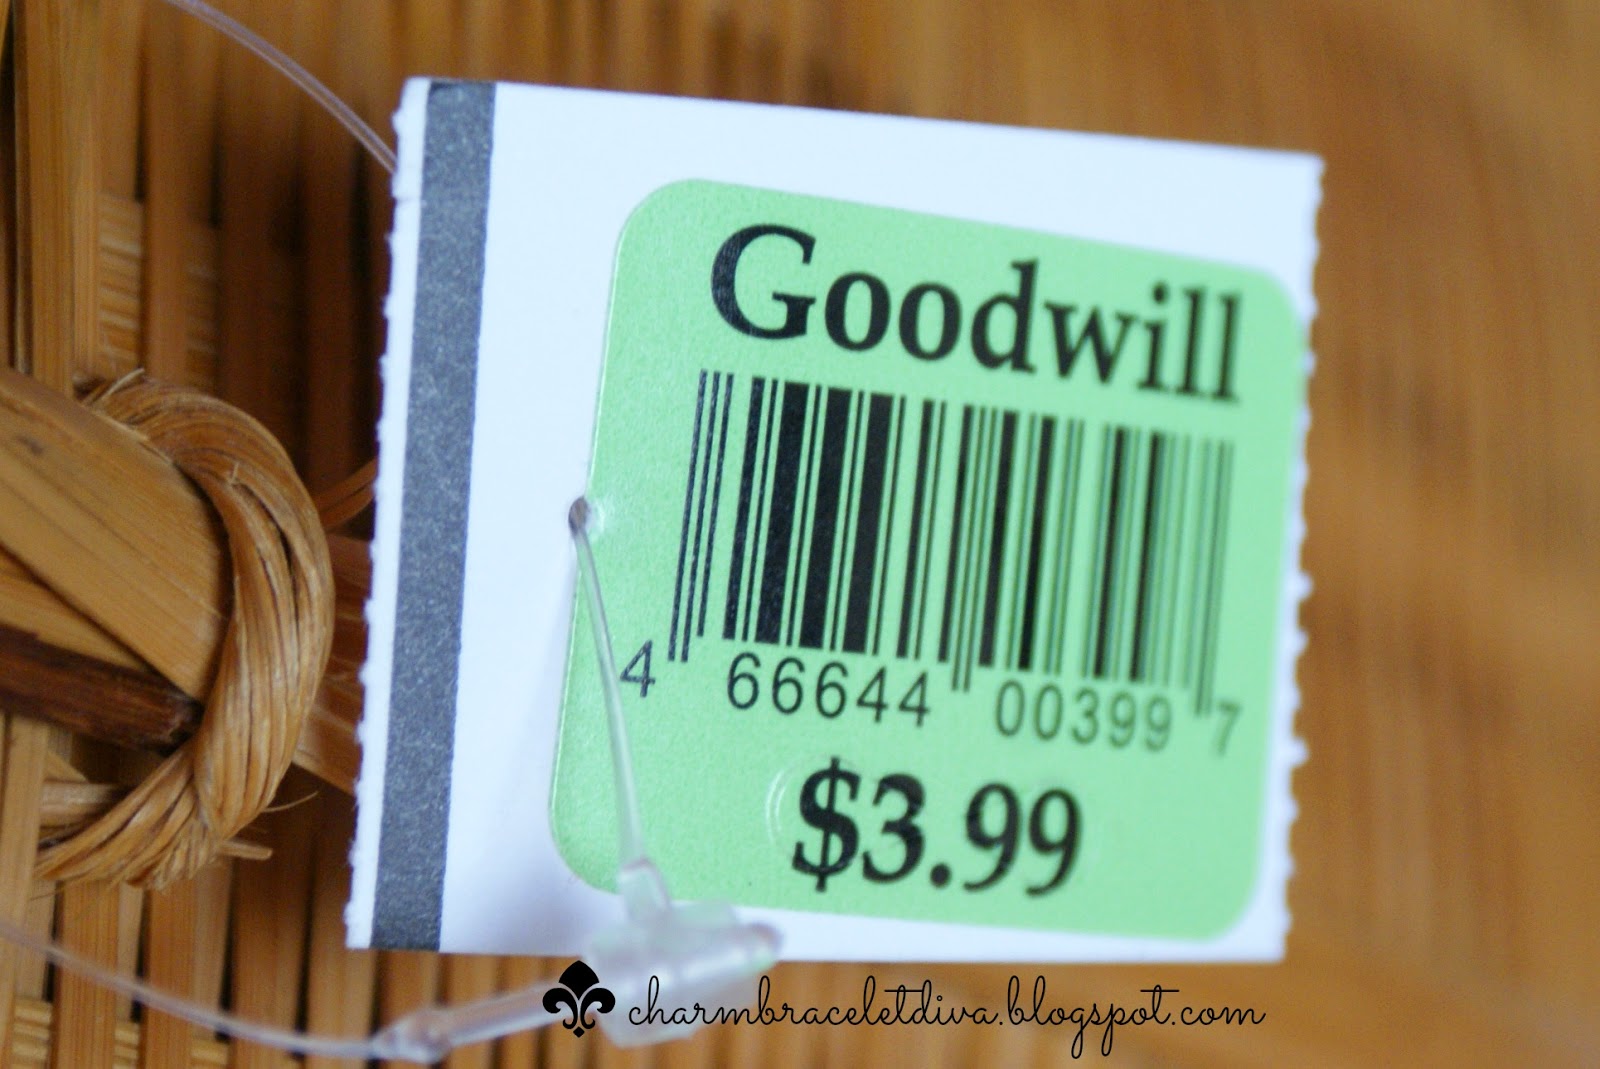 Goodwill price tag